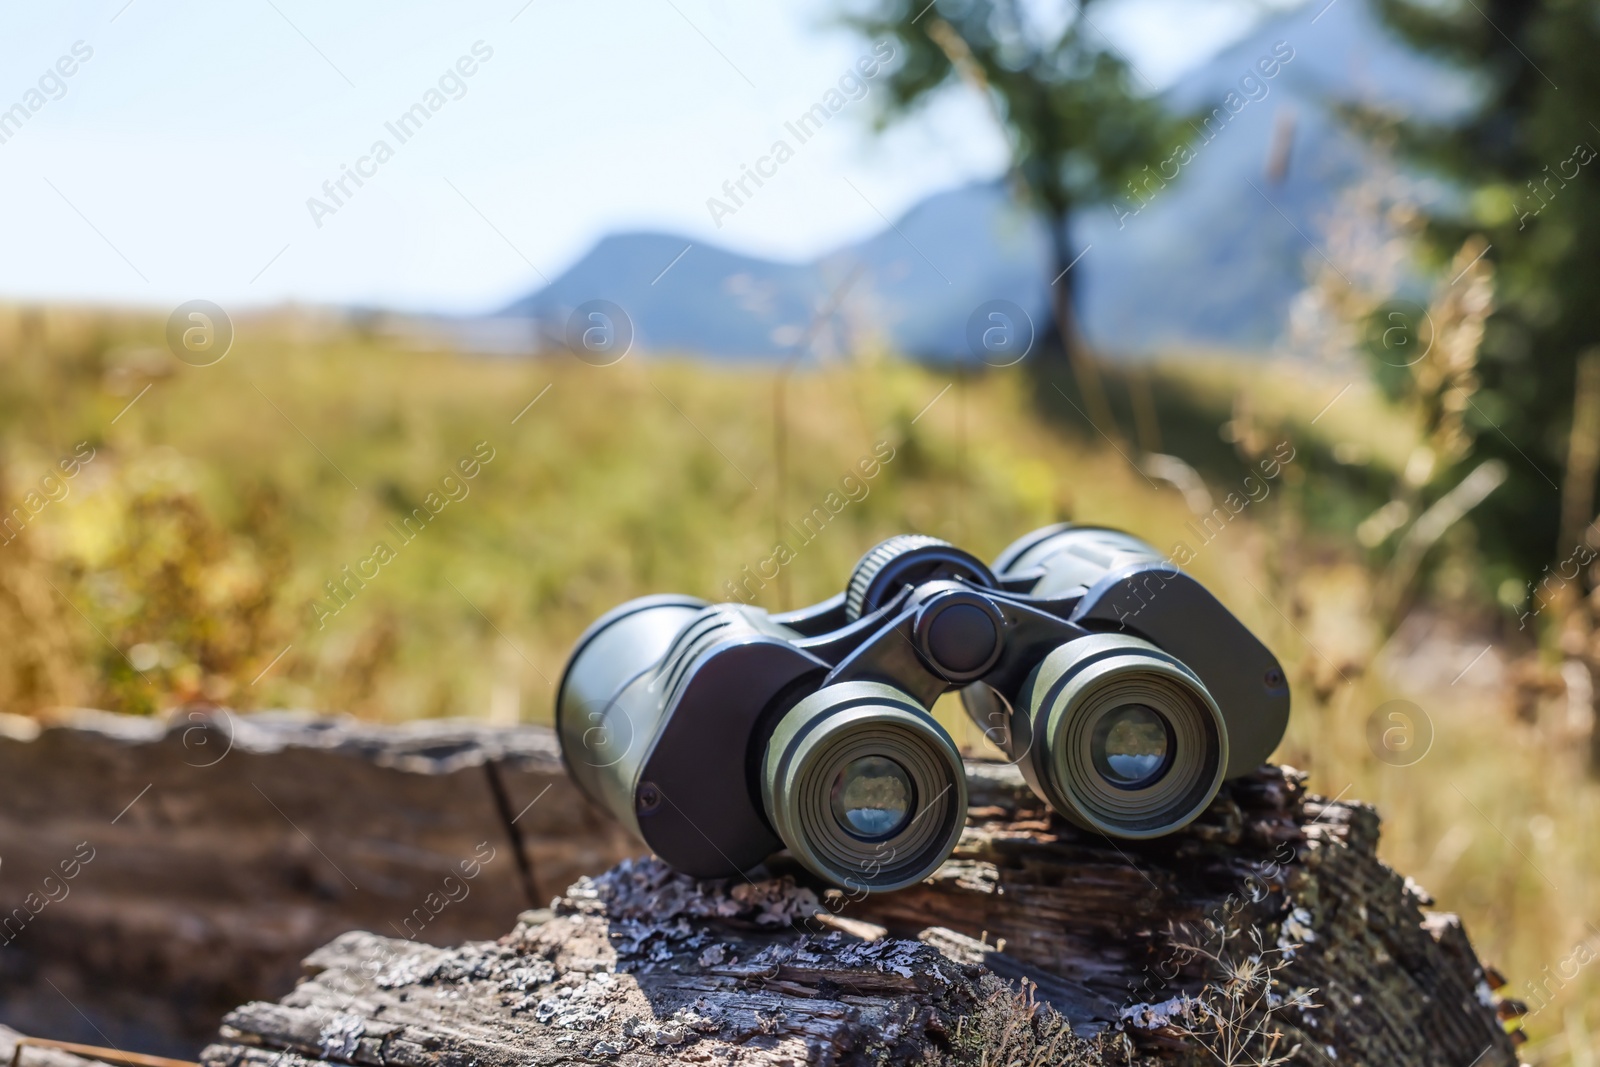 Photo of Modern binoculars on wooden surface outdoors. Camping equipment